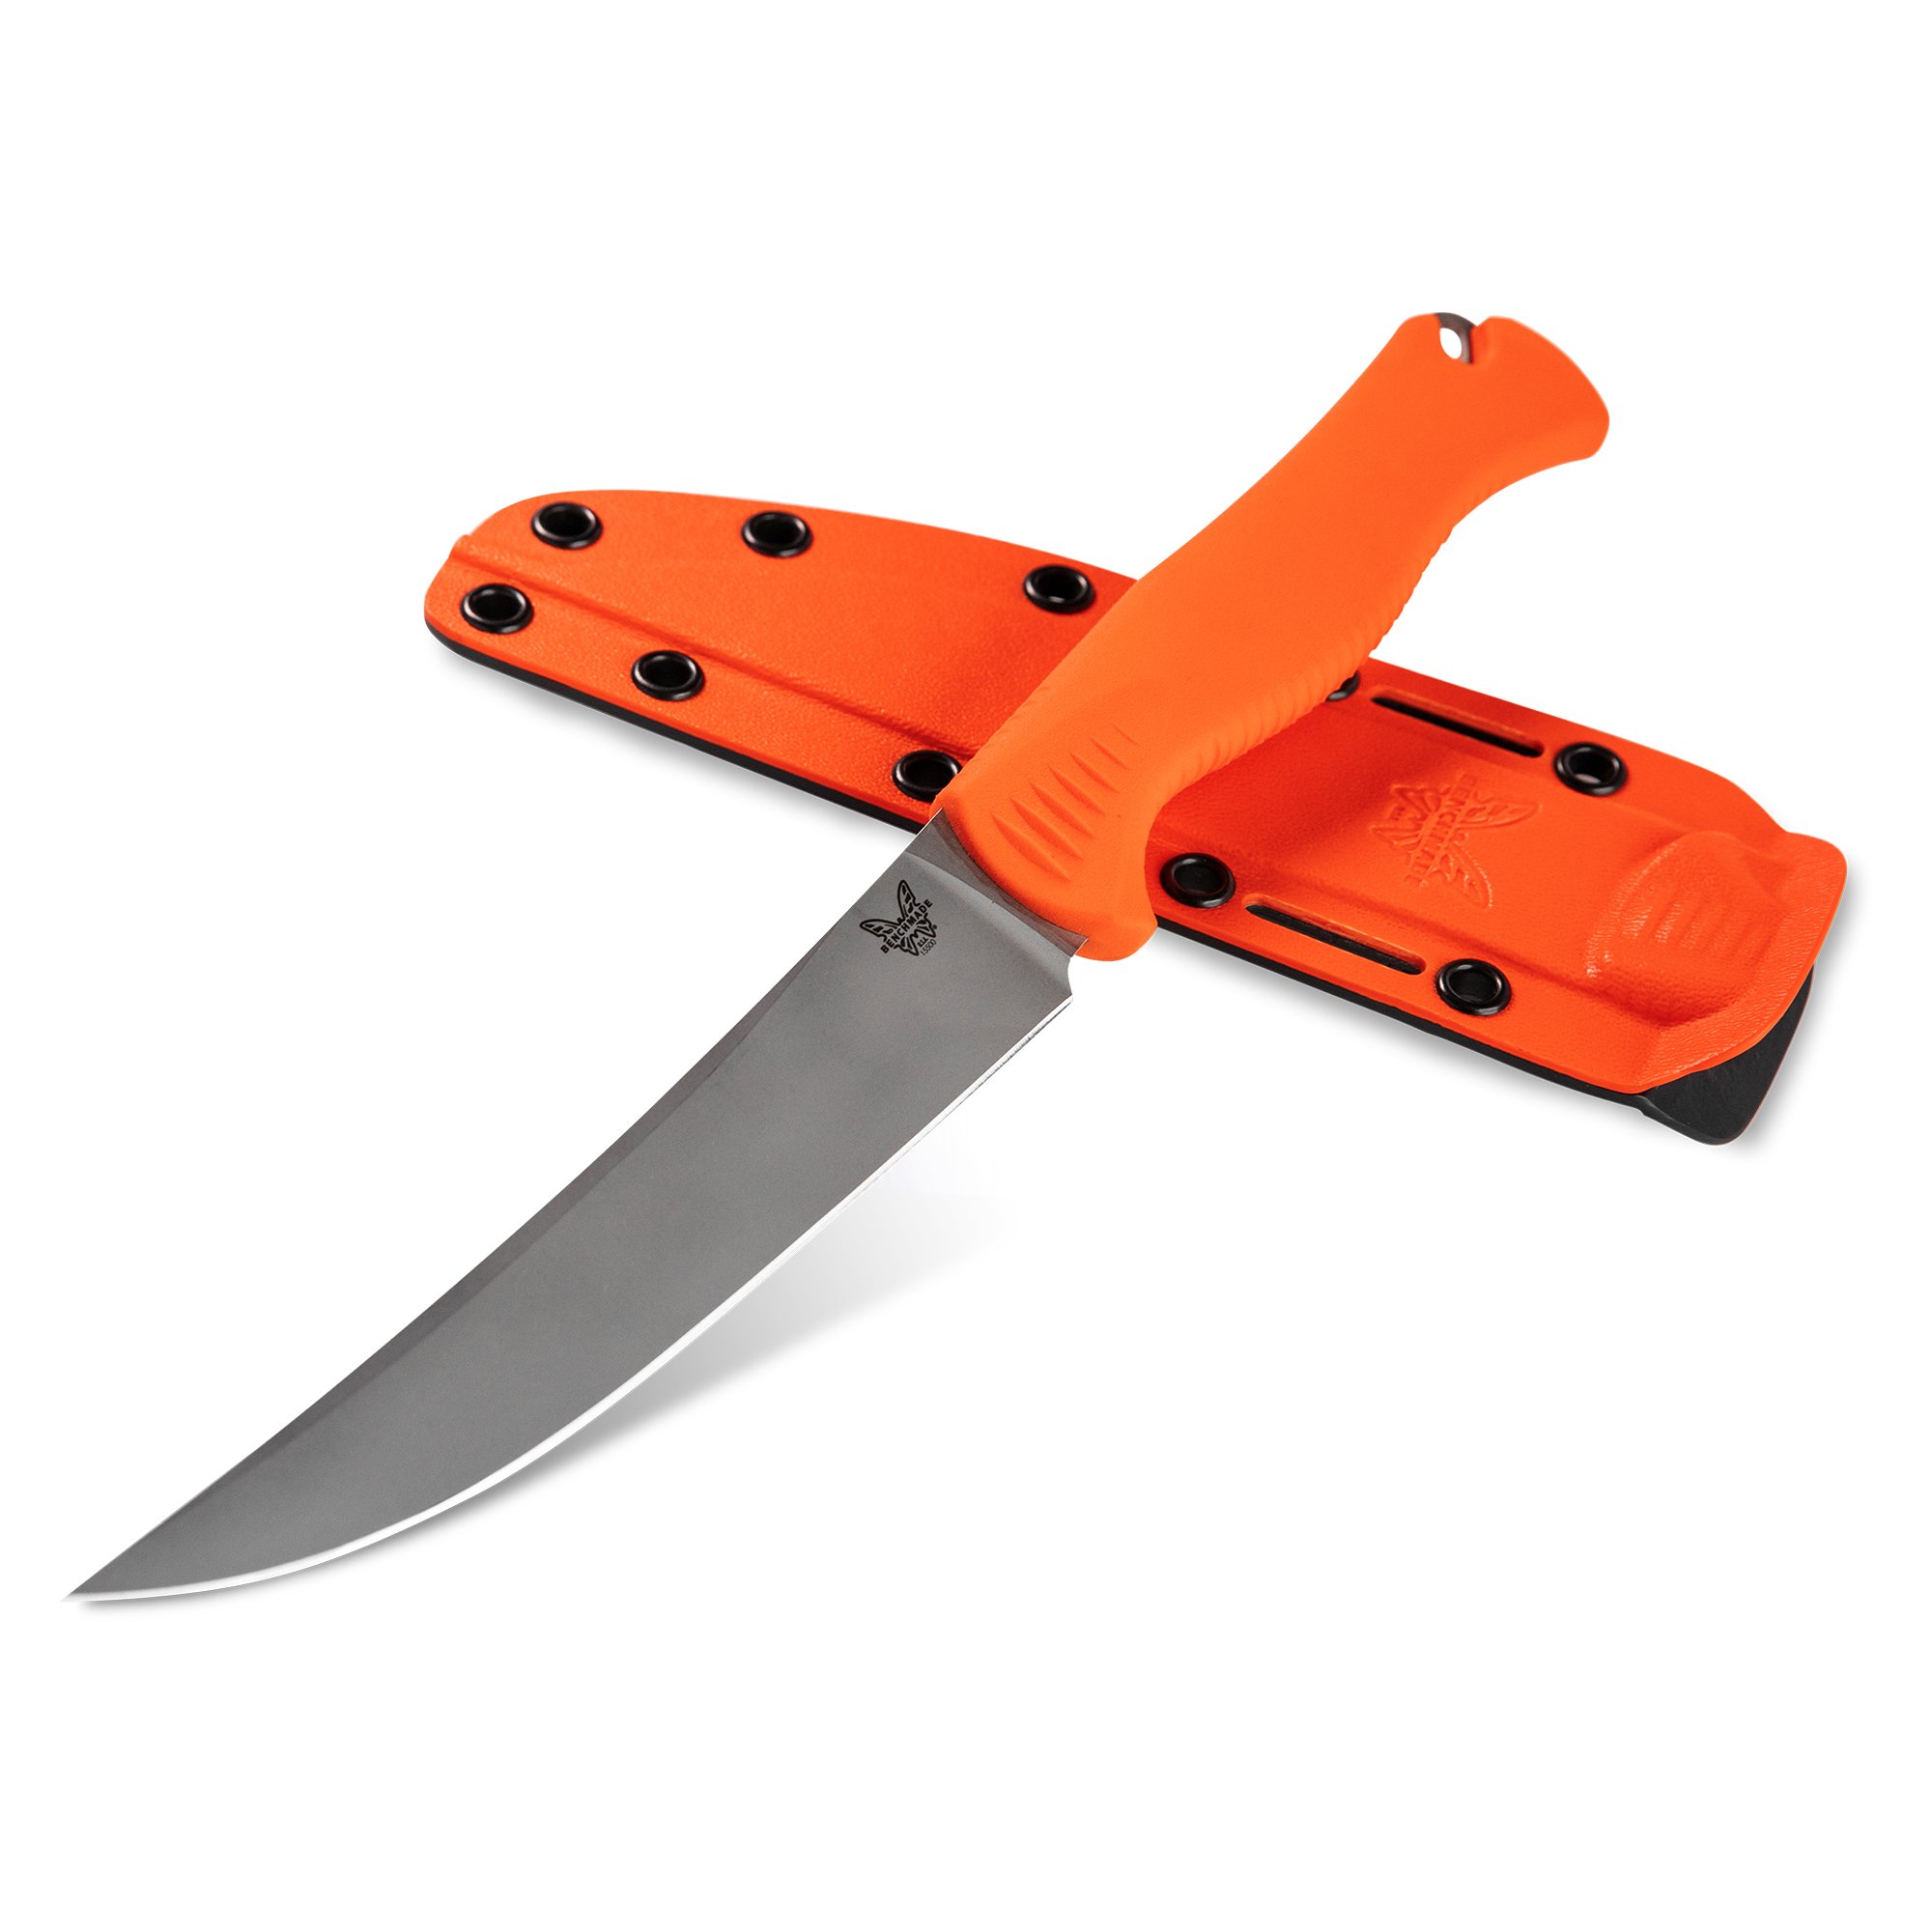 https://store.themeateater.com/on/demandware.static/-/Sites-meateater-master/default/dw8885145f/benchmade-essential-meatcrafter-knife/benchmade-essential-meatcrafter-knife_global_primary.jpg